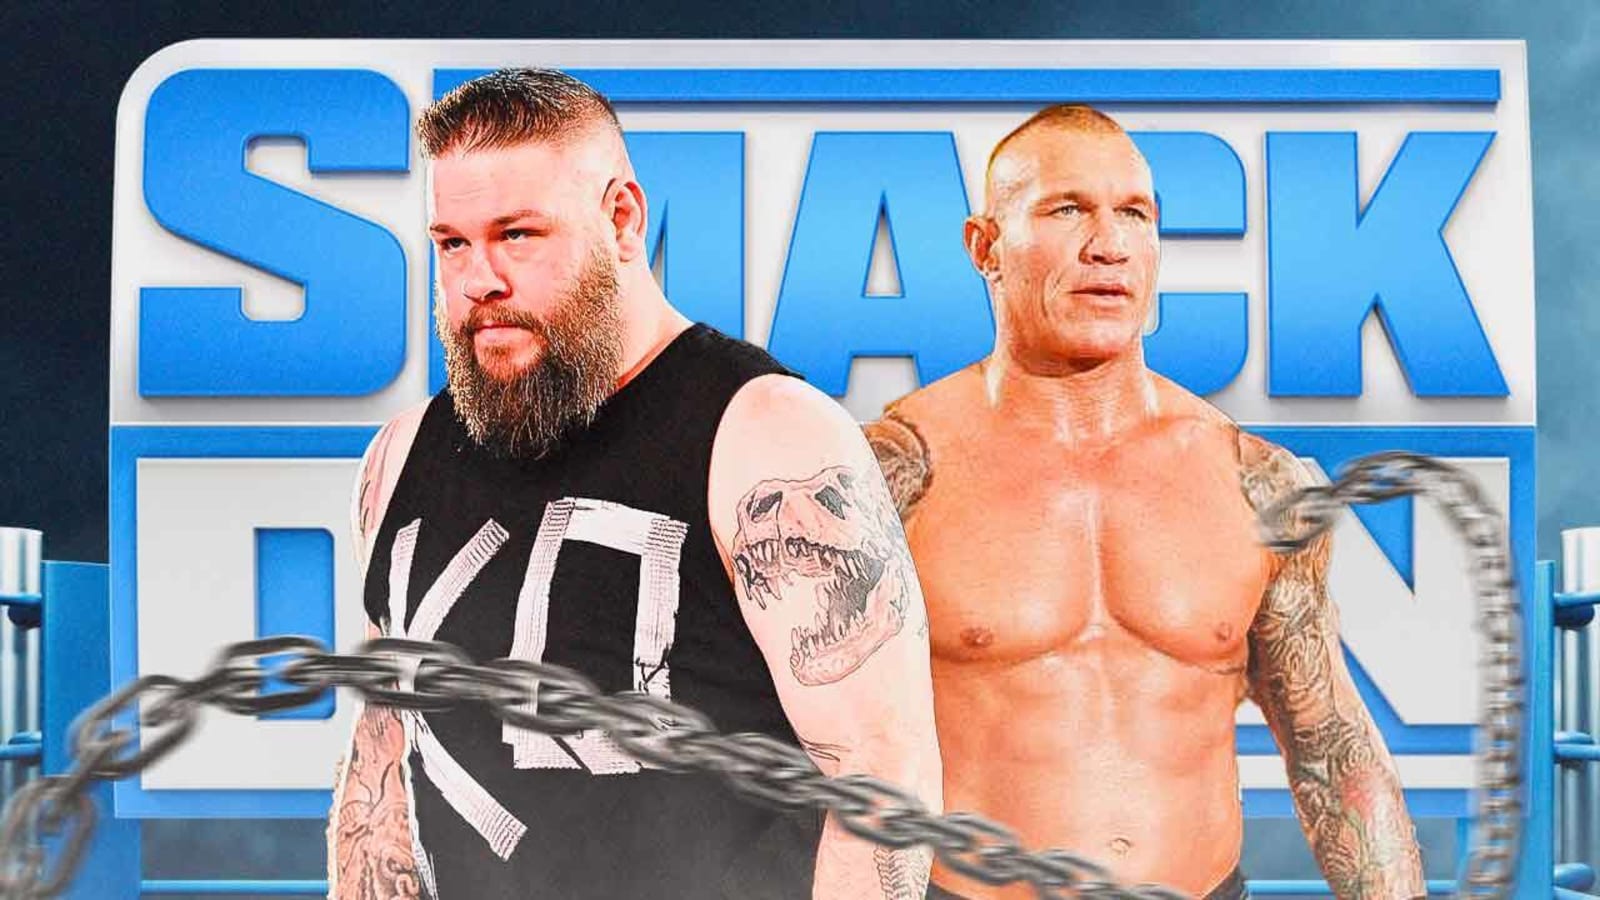 Kevin Owens celebrates Randy Orton for becoming a role model in WWE